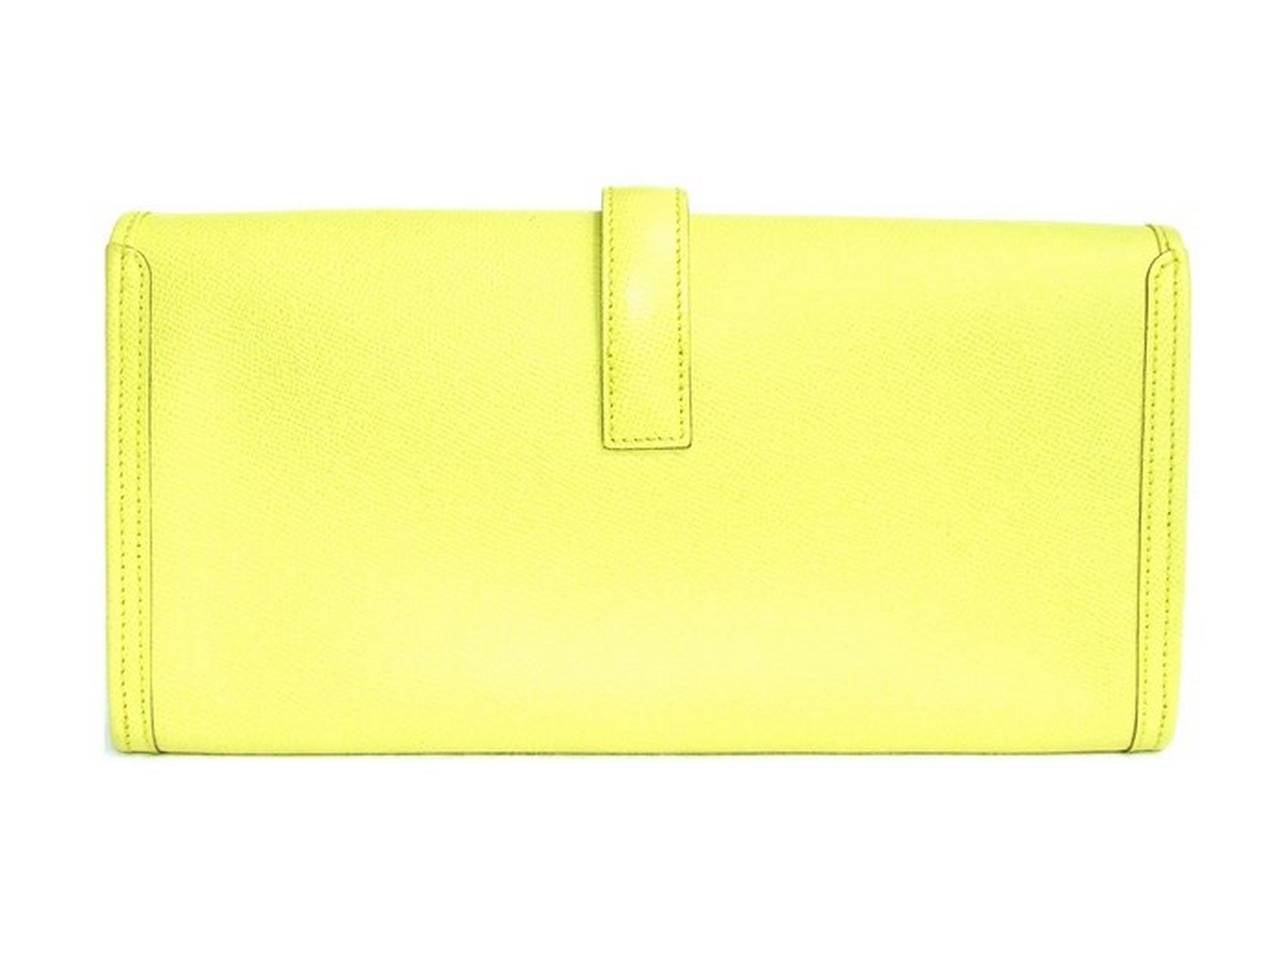 BEAUTIFUL AUTHENTIC HERMES HANDBAG

JIGE ELAN

Made in France, stamp Q in a square (2013 colorway)

Made of Epsom leather, lined with lambskin leather

 
 Colorway: Soufre (yellow) outside and inside

